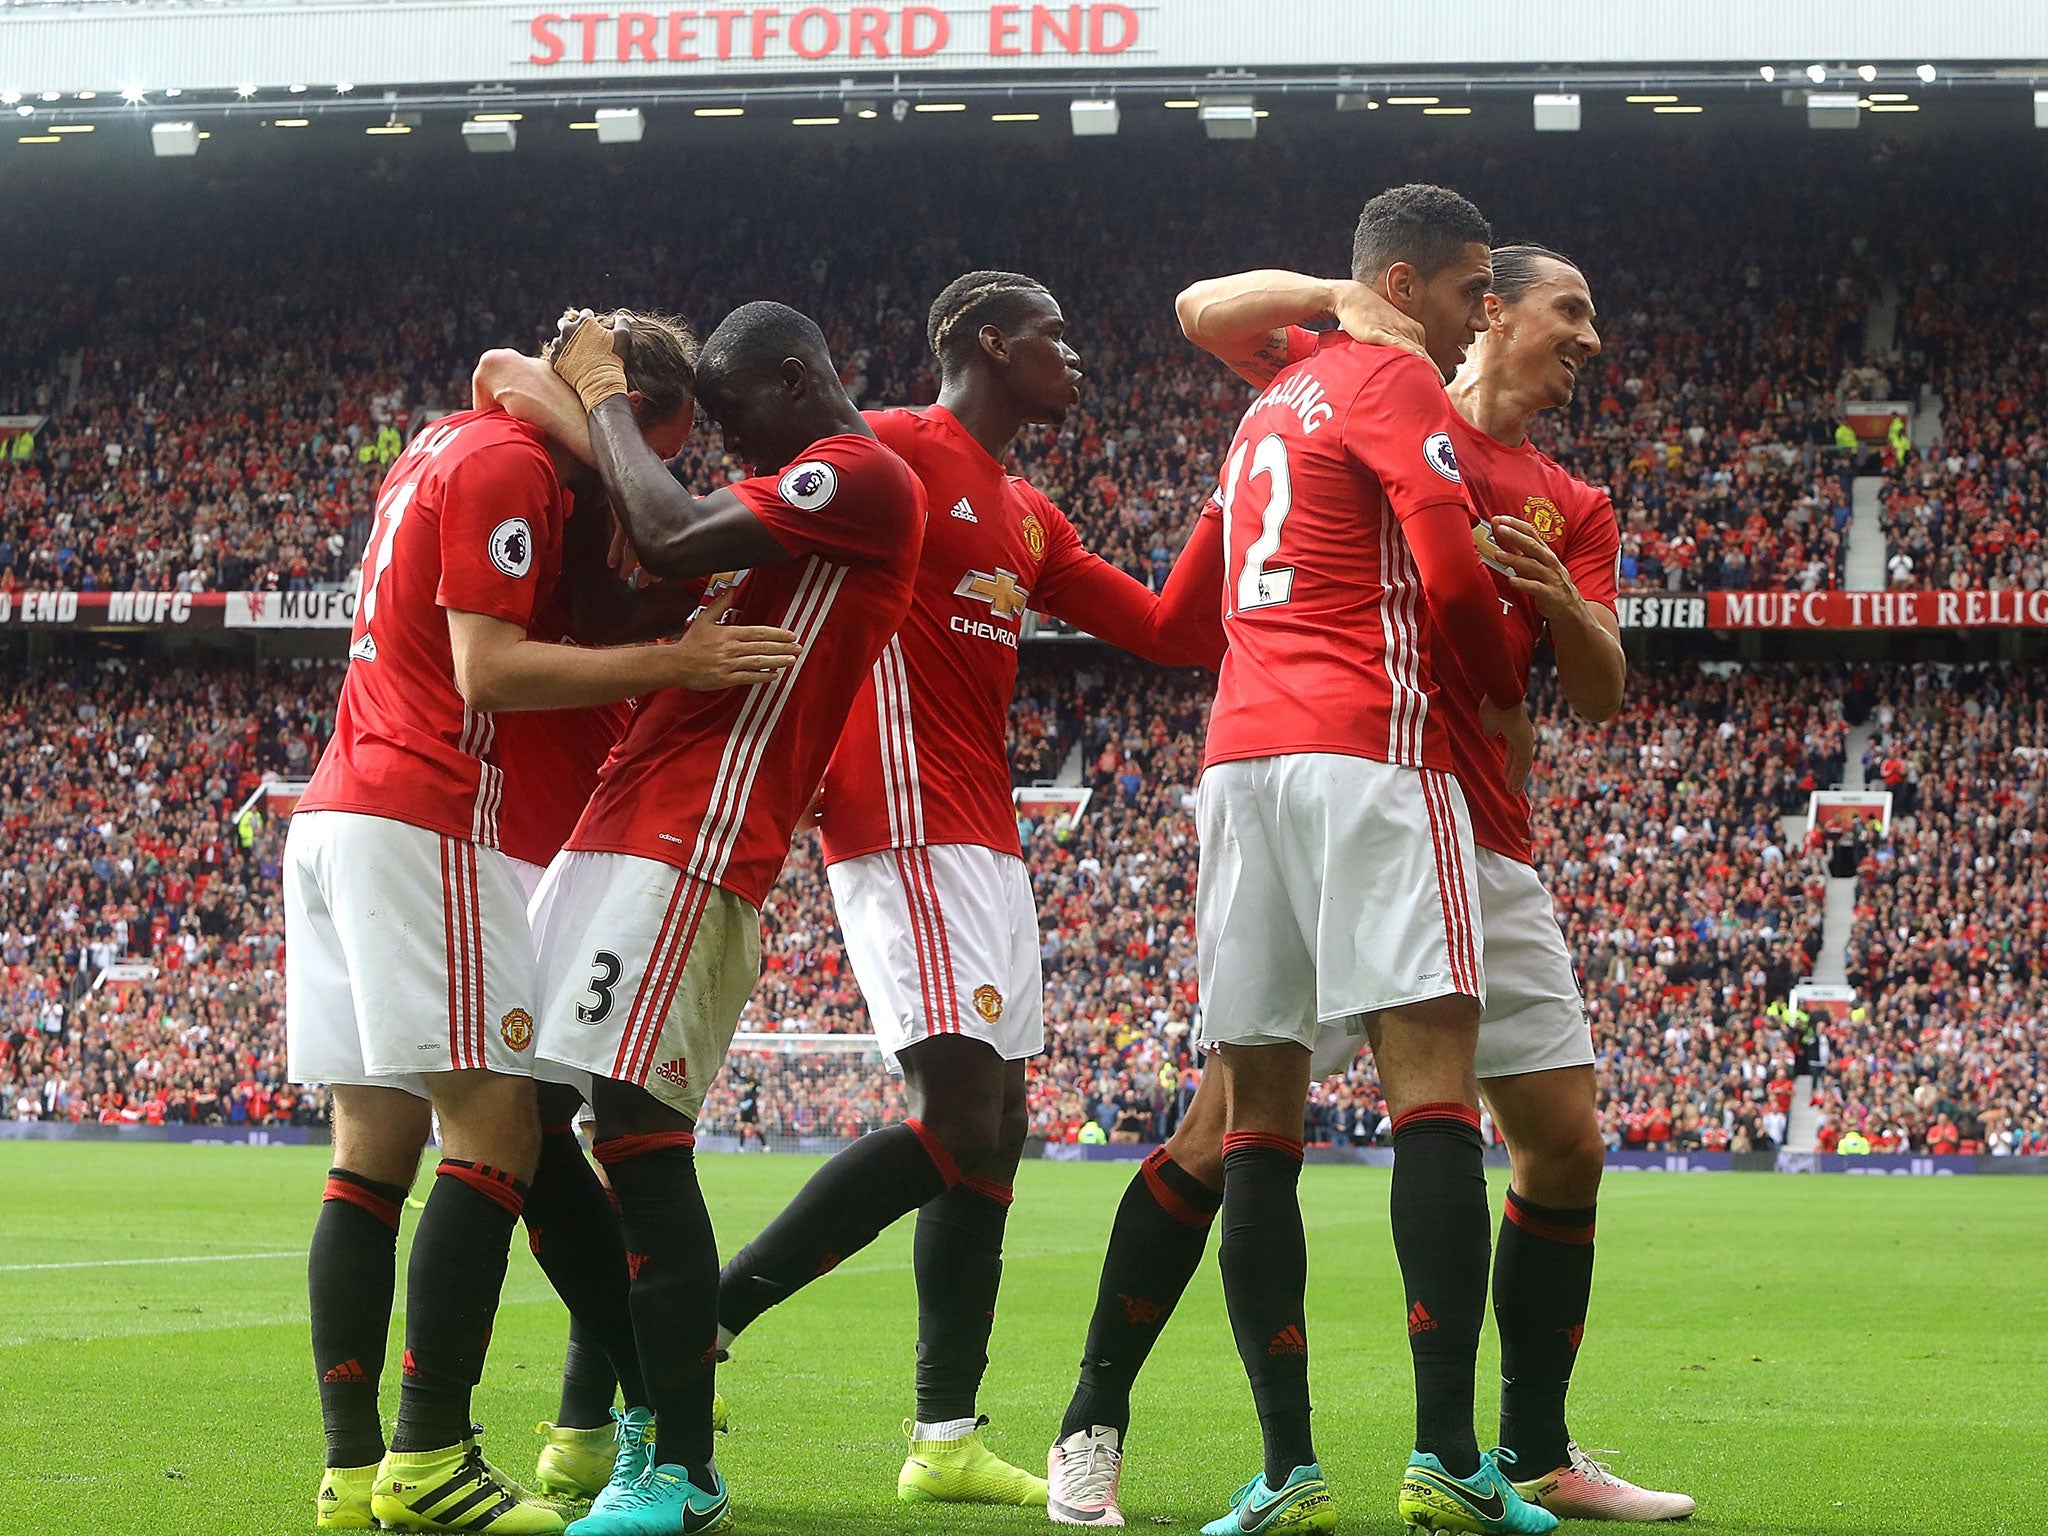 The storm clouds cleared at Old Trafford as Manchester United ran four past Leicester City